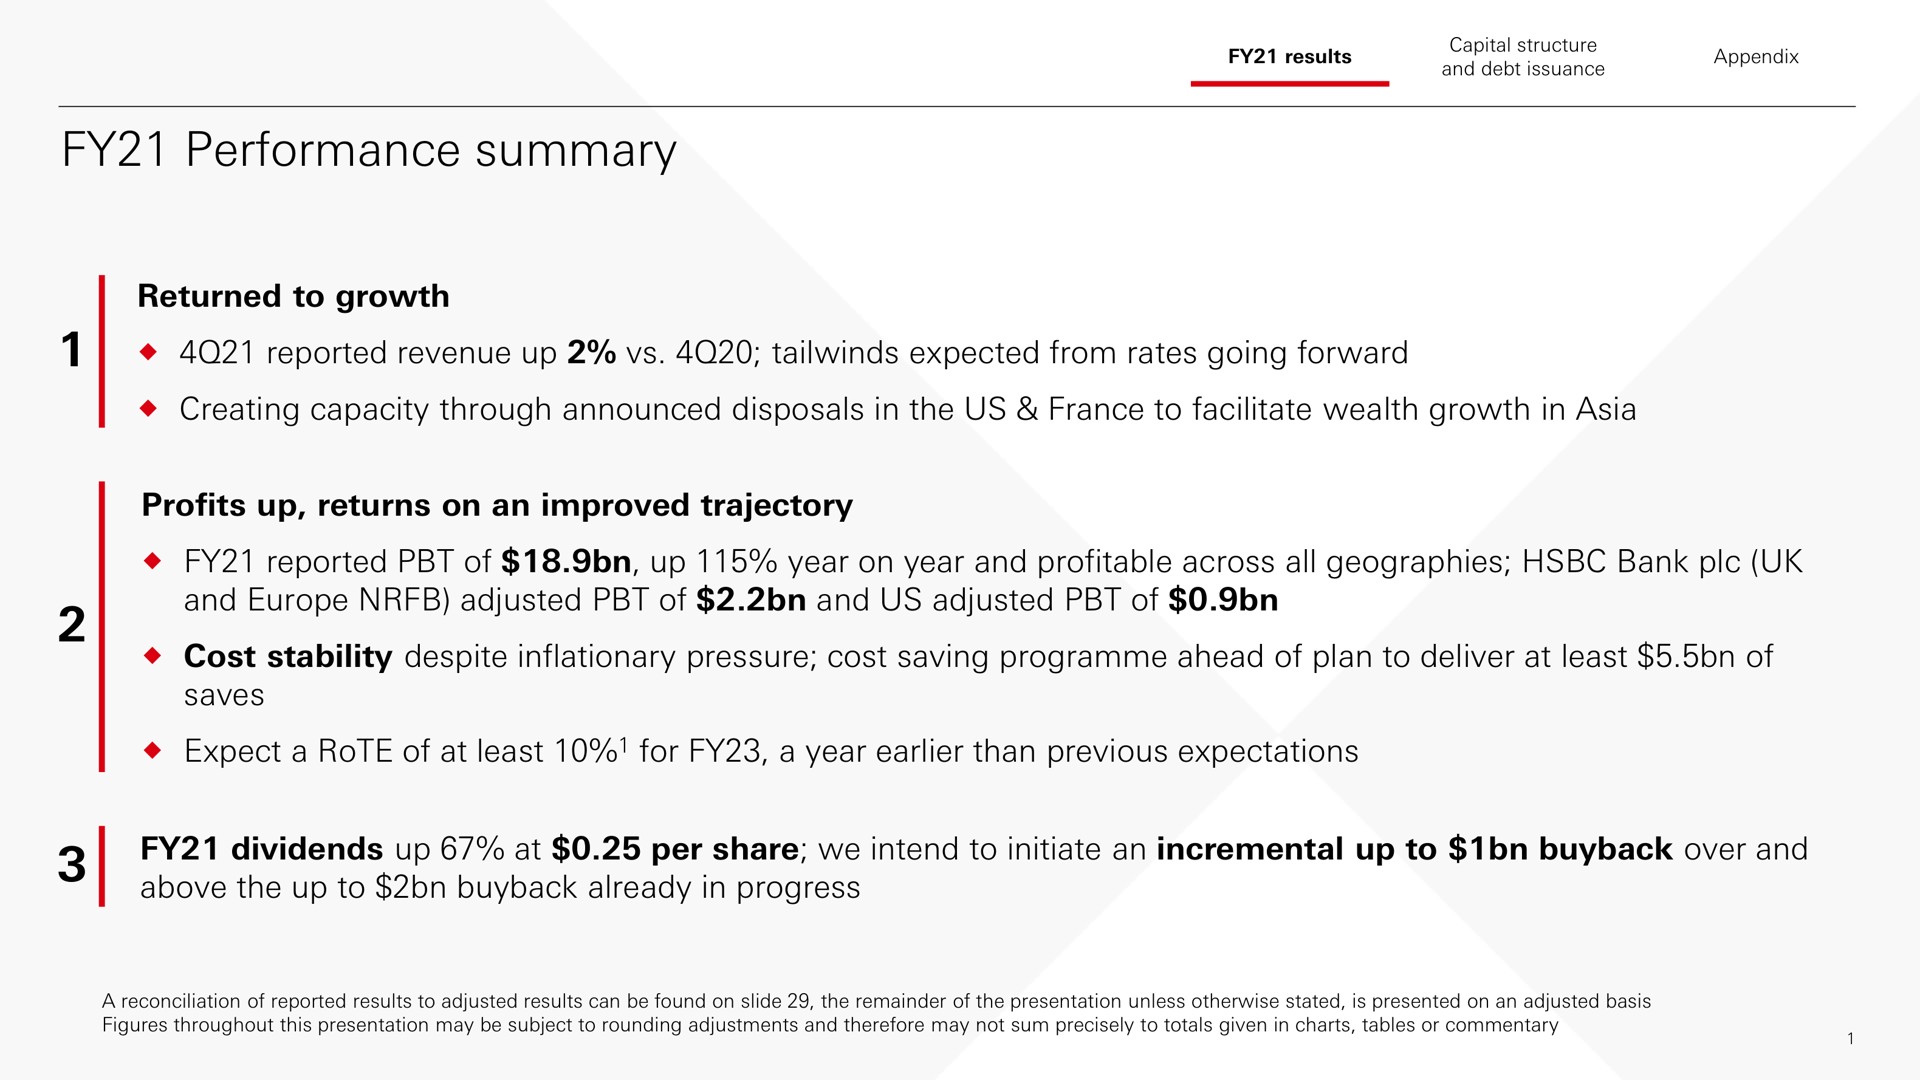 performance summary returned to growth reported revenue up expected from rates going forward creating capacity through announced disposals in the us to facilitate wealth growth in profits up returns on an improved trajectory reported of up year on year and profitable across all geographies bank and adjusted of and us adjusted of cost stability despite inflationary pressure cost saving ahead of plan to deliver at least of saves expect a rote of at least for a year than previous expectations dividends up at per share we intend to initiate an incremental up to over and above the up to already in progress | HSBC